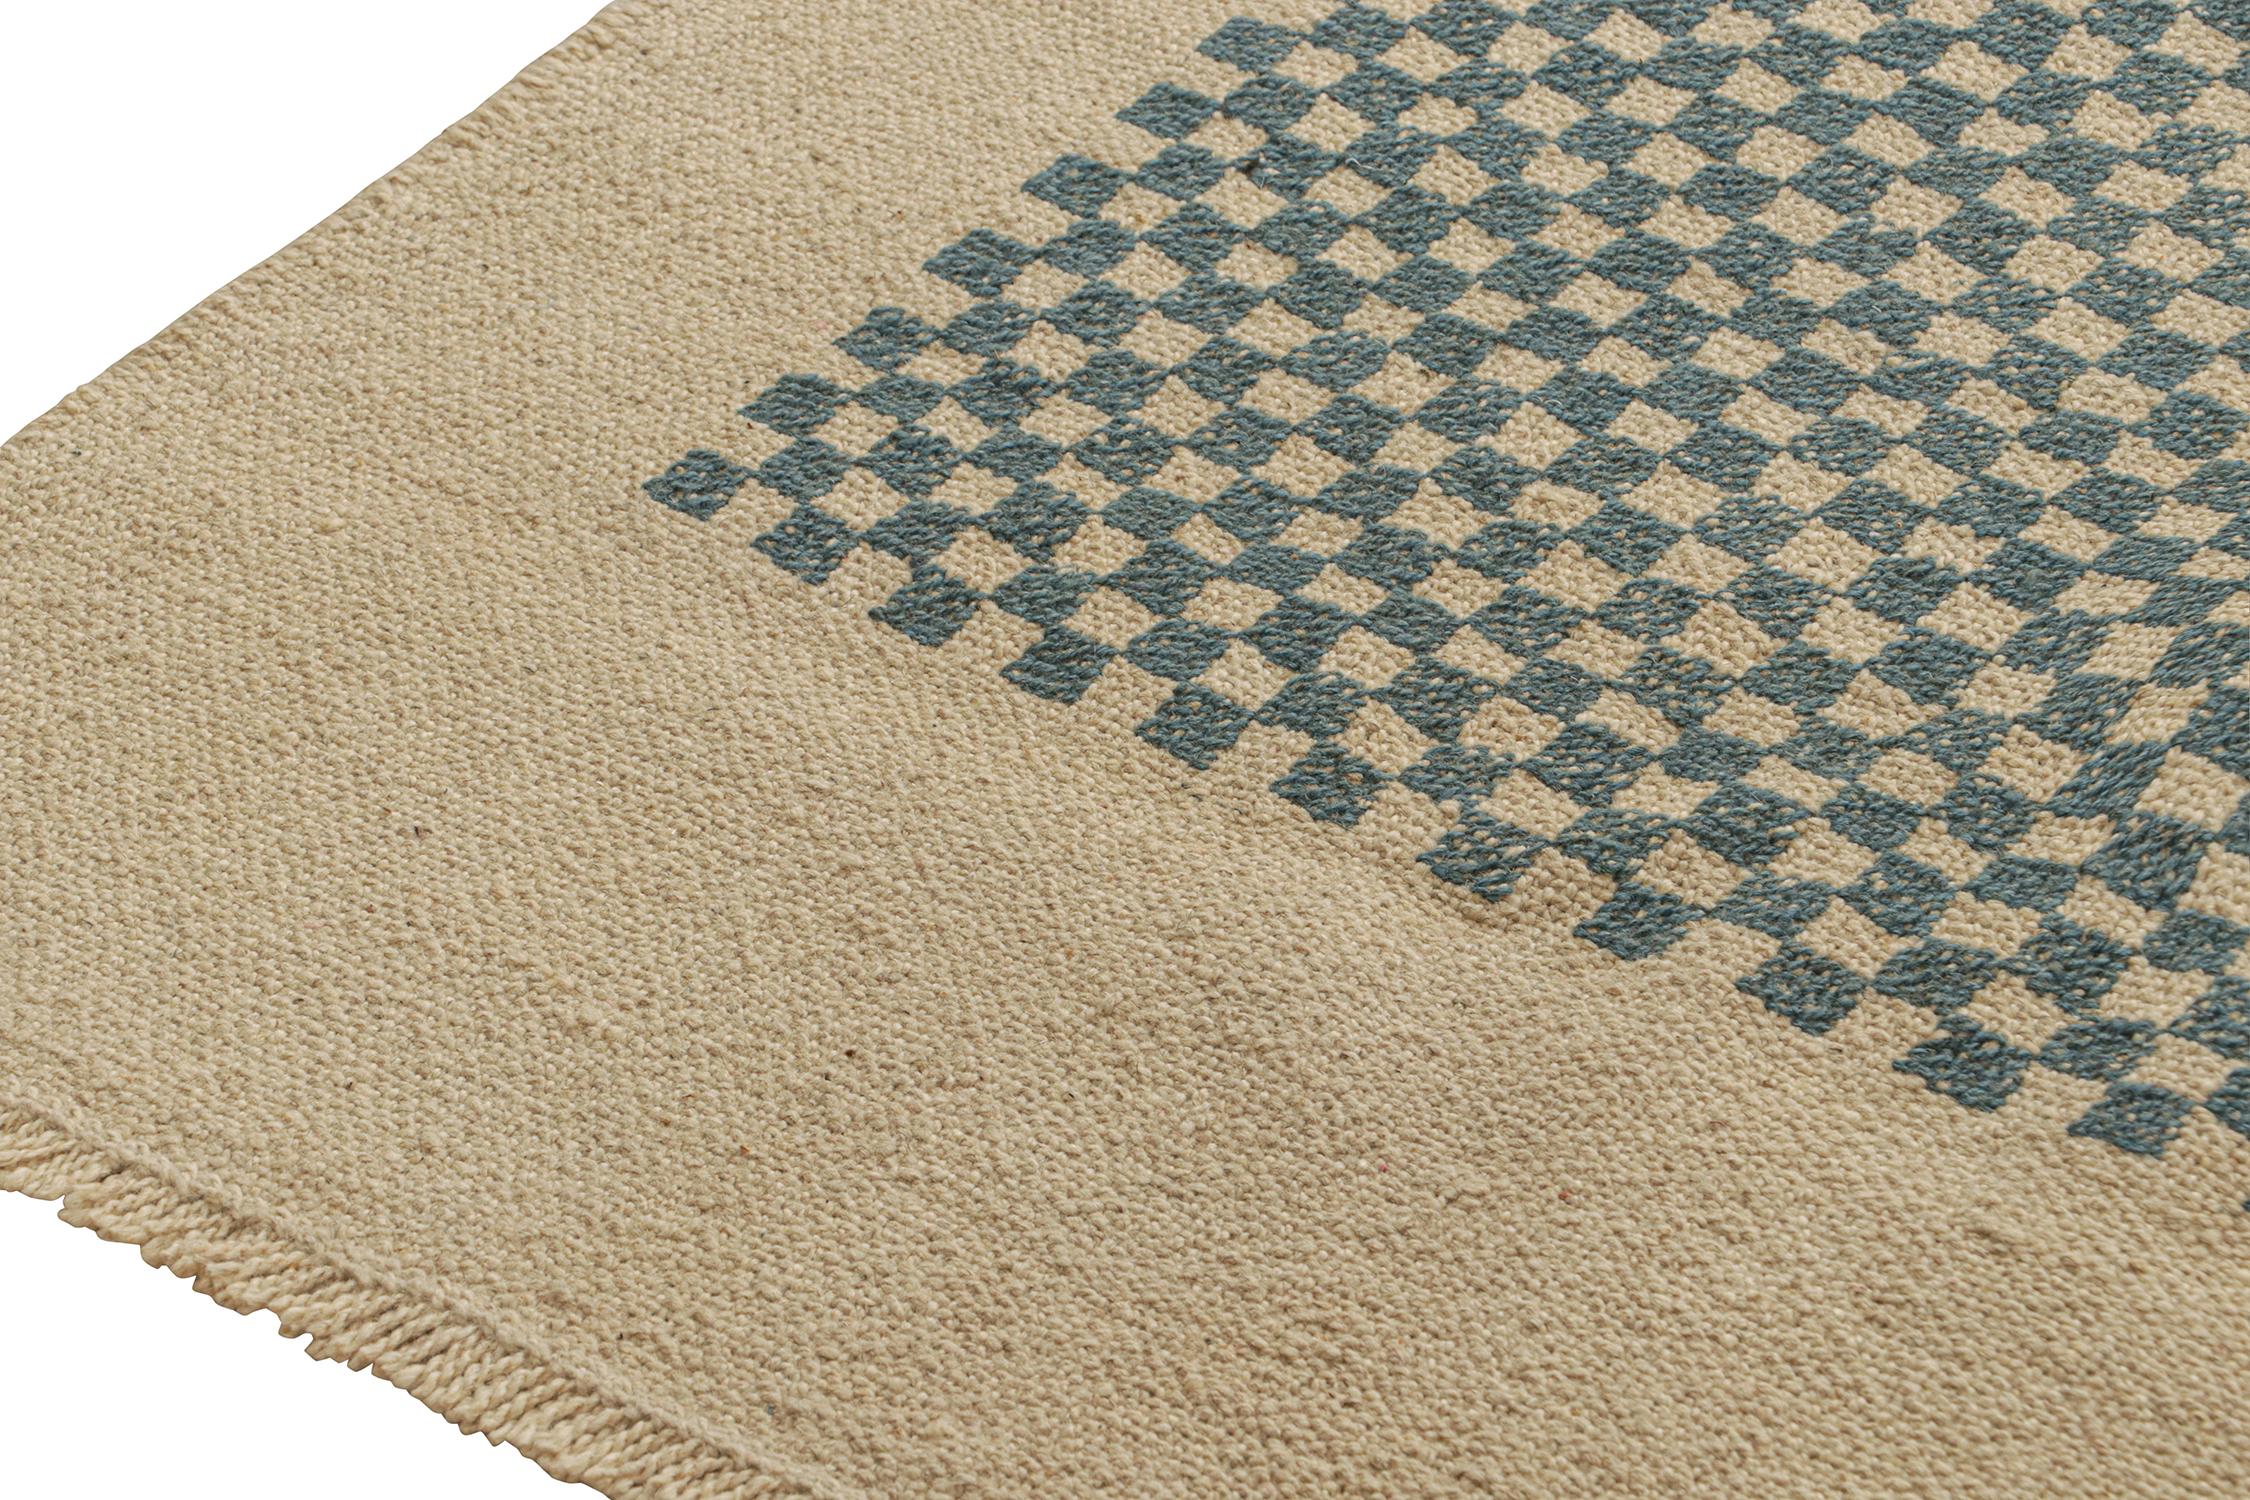 Indian Rug & Kilim’s Sofreh-Style Persian Kilim in Beige with Blue Checkerboard Pattern For Sale